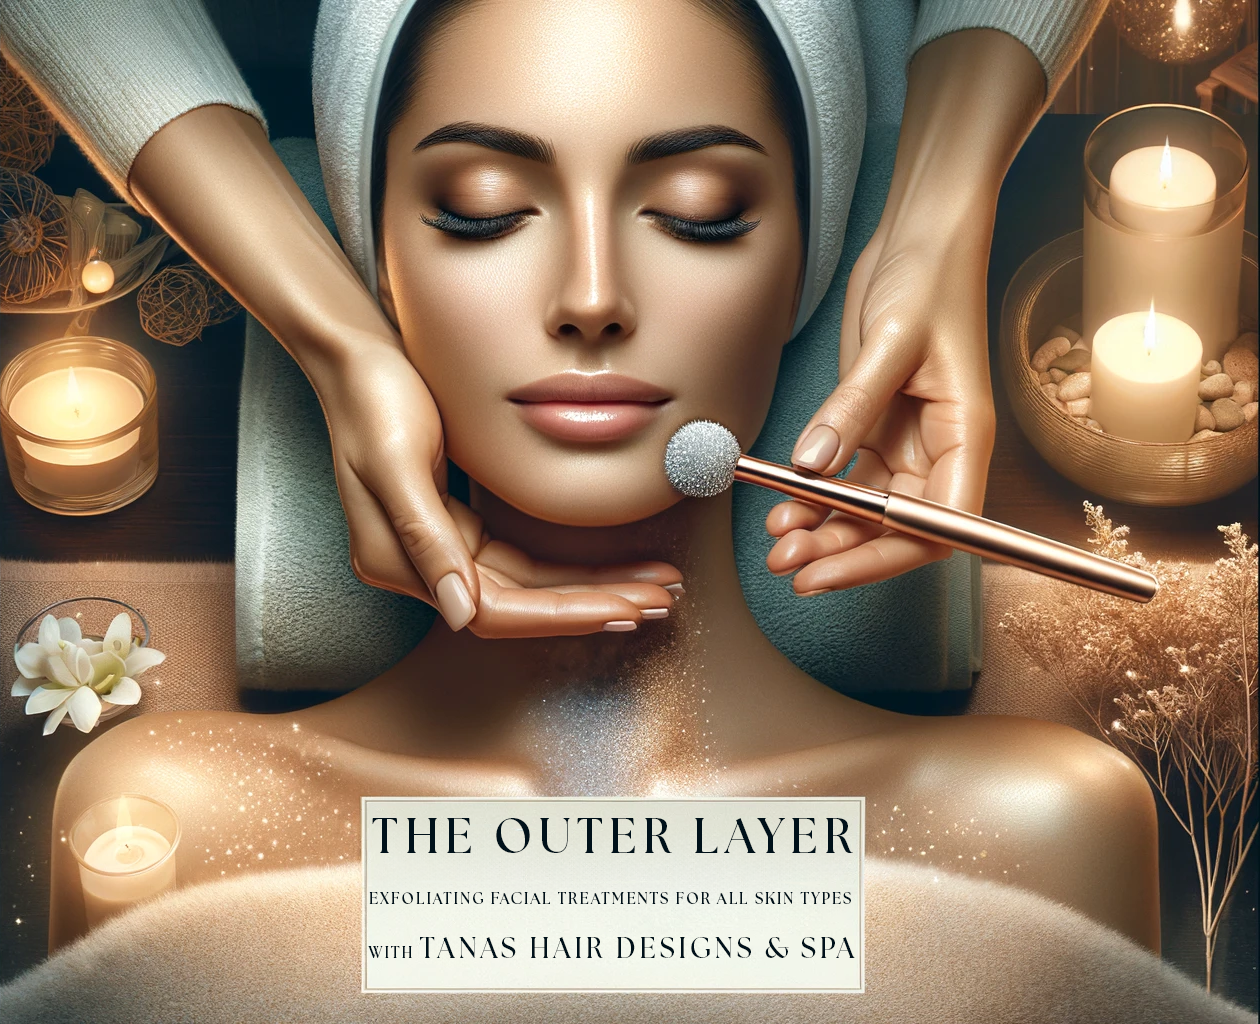 The Outer Layer: Exfoliating Facial Treatments for All Skin Types